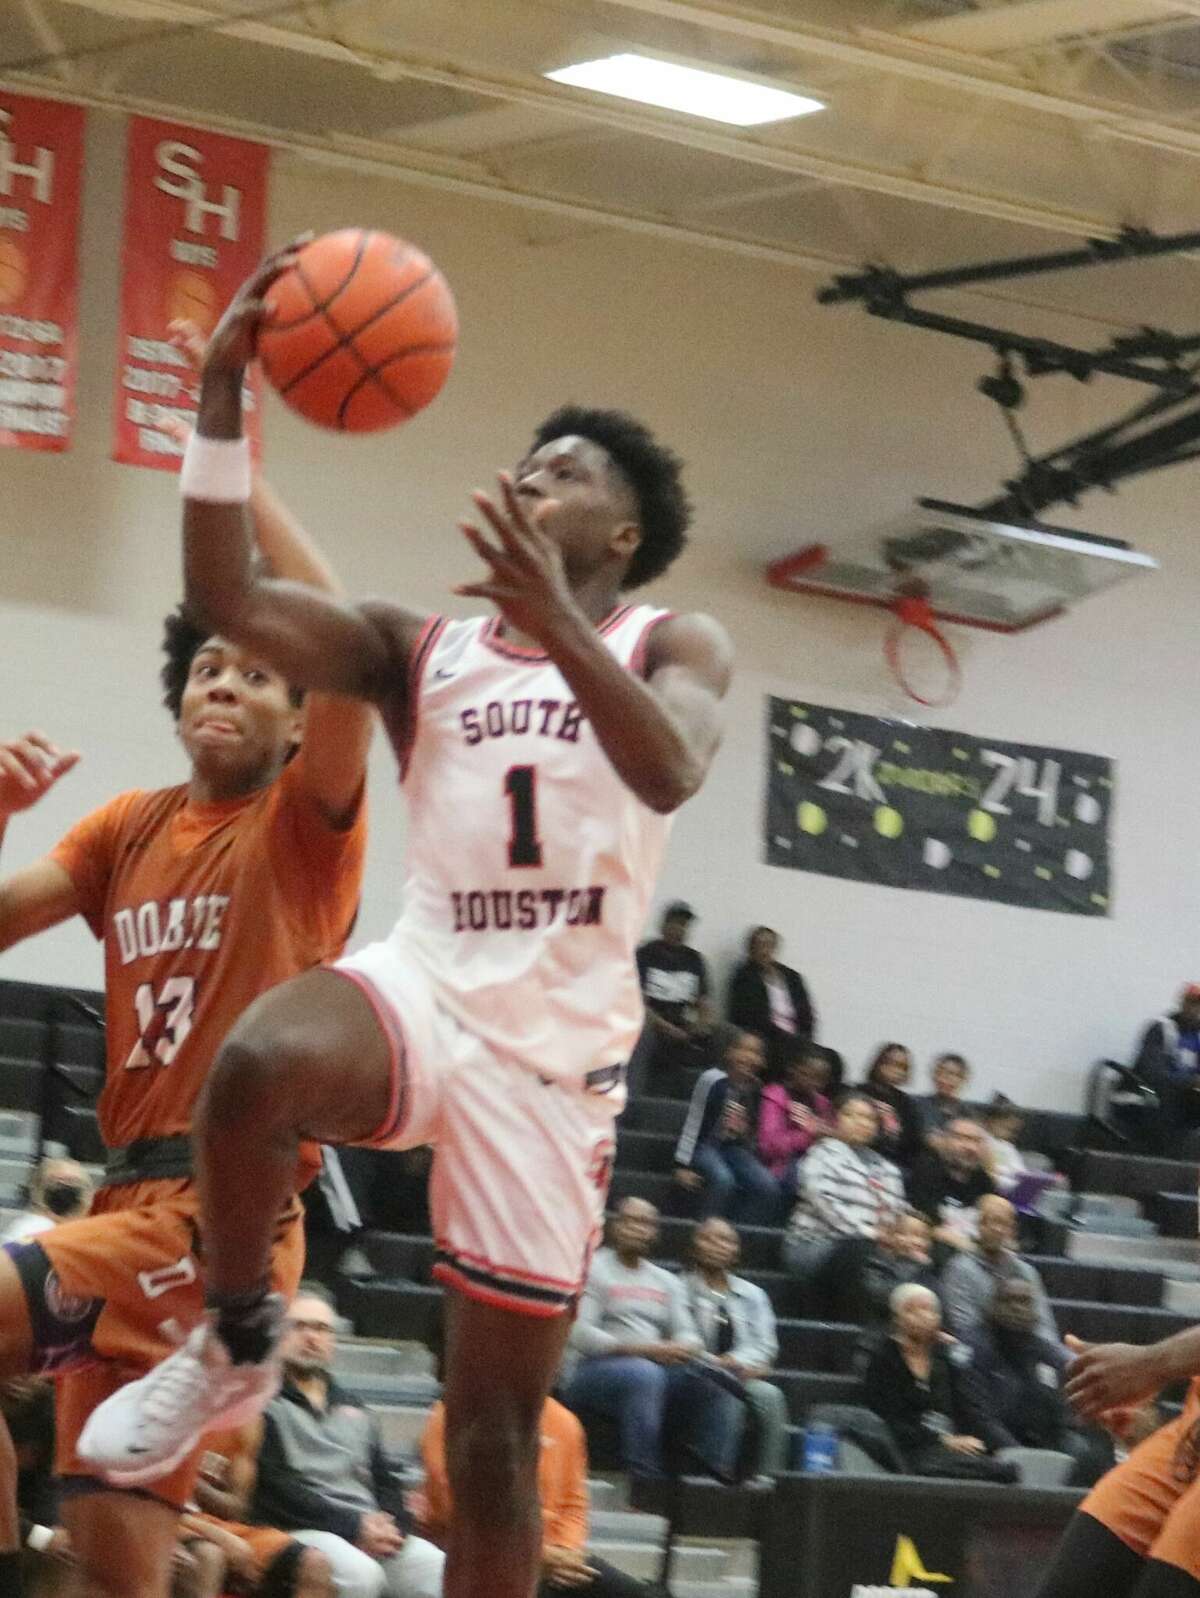 South Houston's Josh Larry contributed to the Trojans winning a big road game Wednesday night that puts them in terrific position to win the district crown.